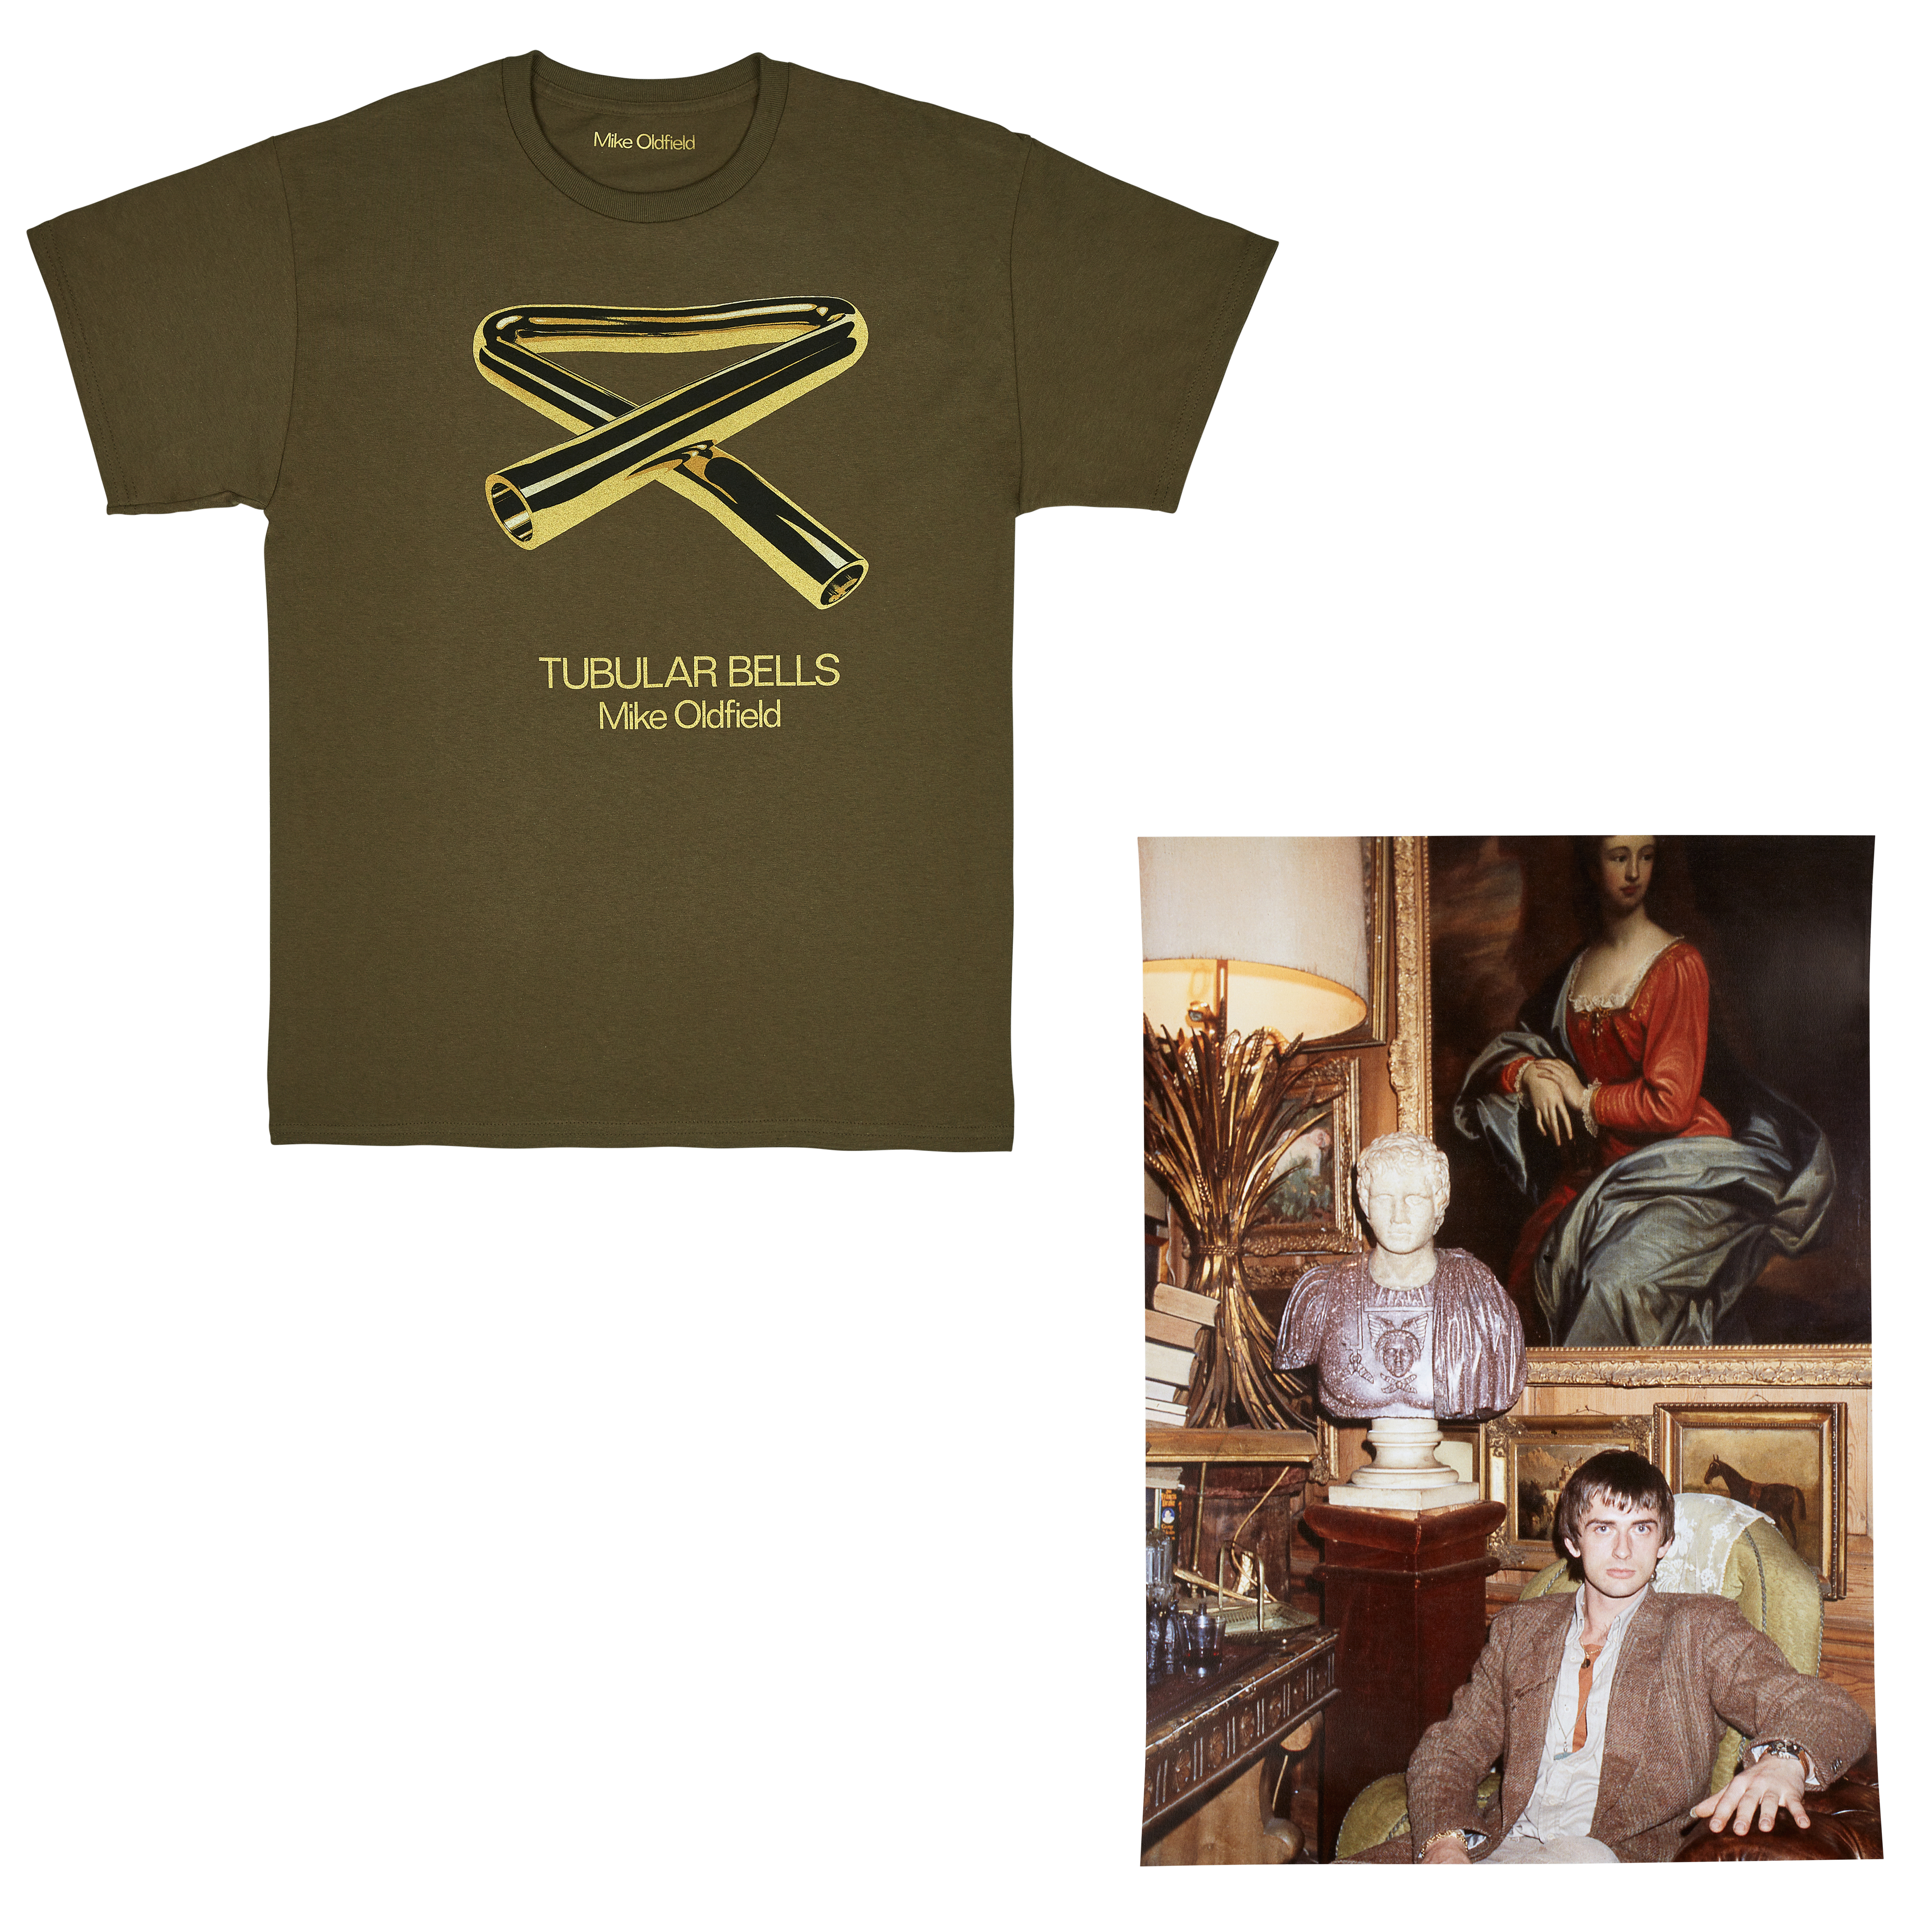 Official Hand Numbered Limited Edition A2 Print (1/2) + Official Tubular Bells Anniversary T-shirt (Olive)